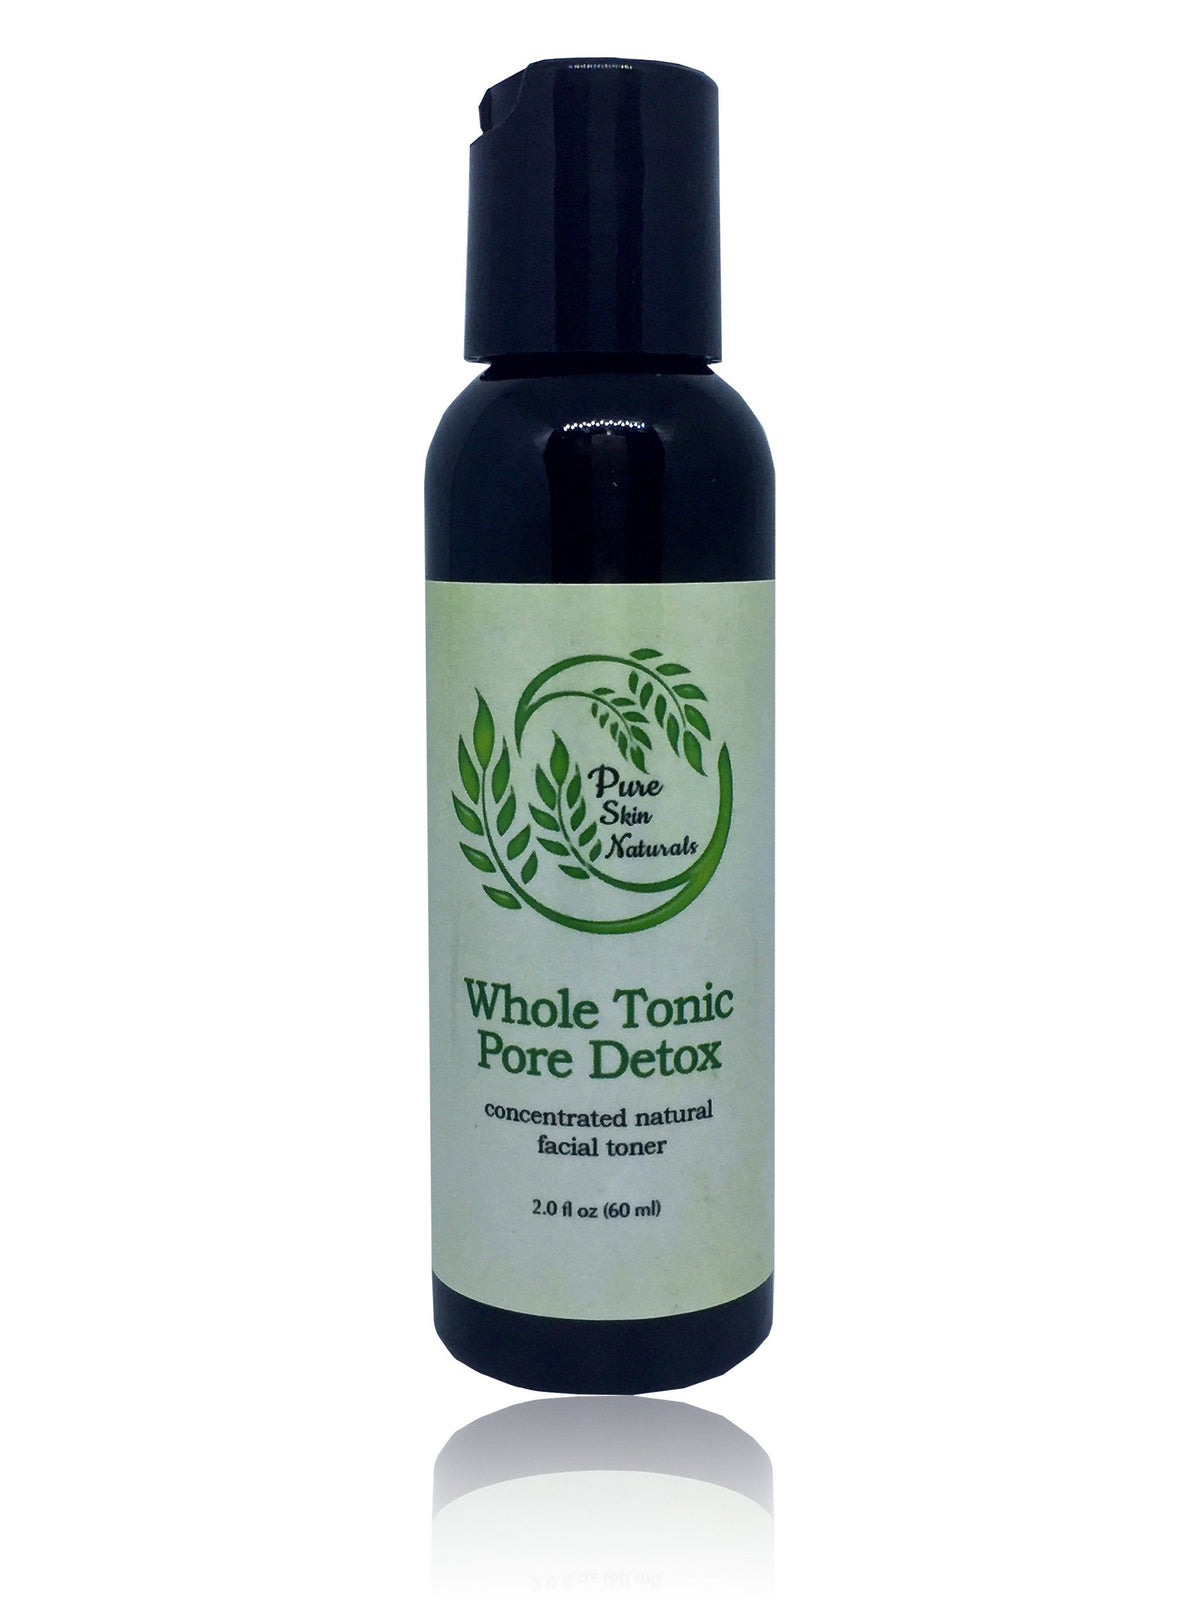 Whole Tonic Pore Detox Concentrated Natural Facial Toner For Blackheads And Congested Pores